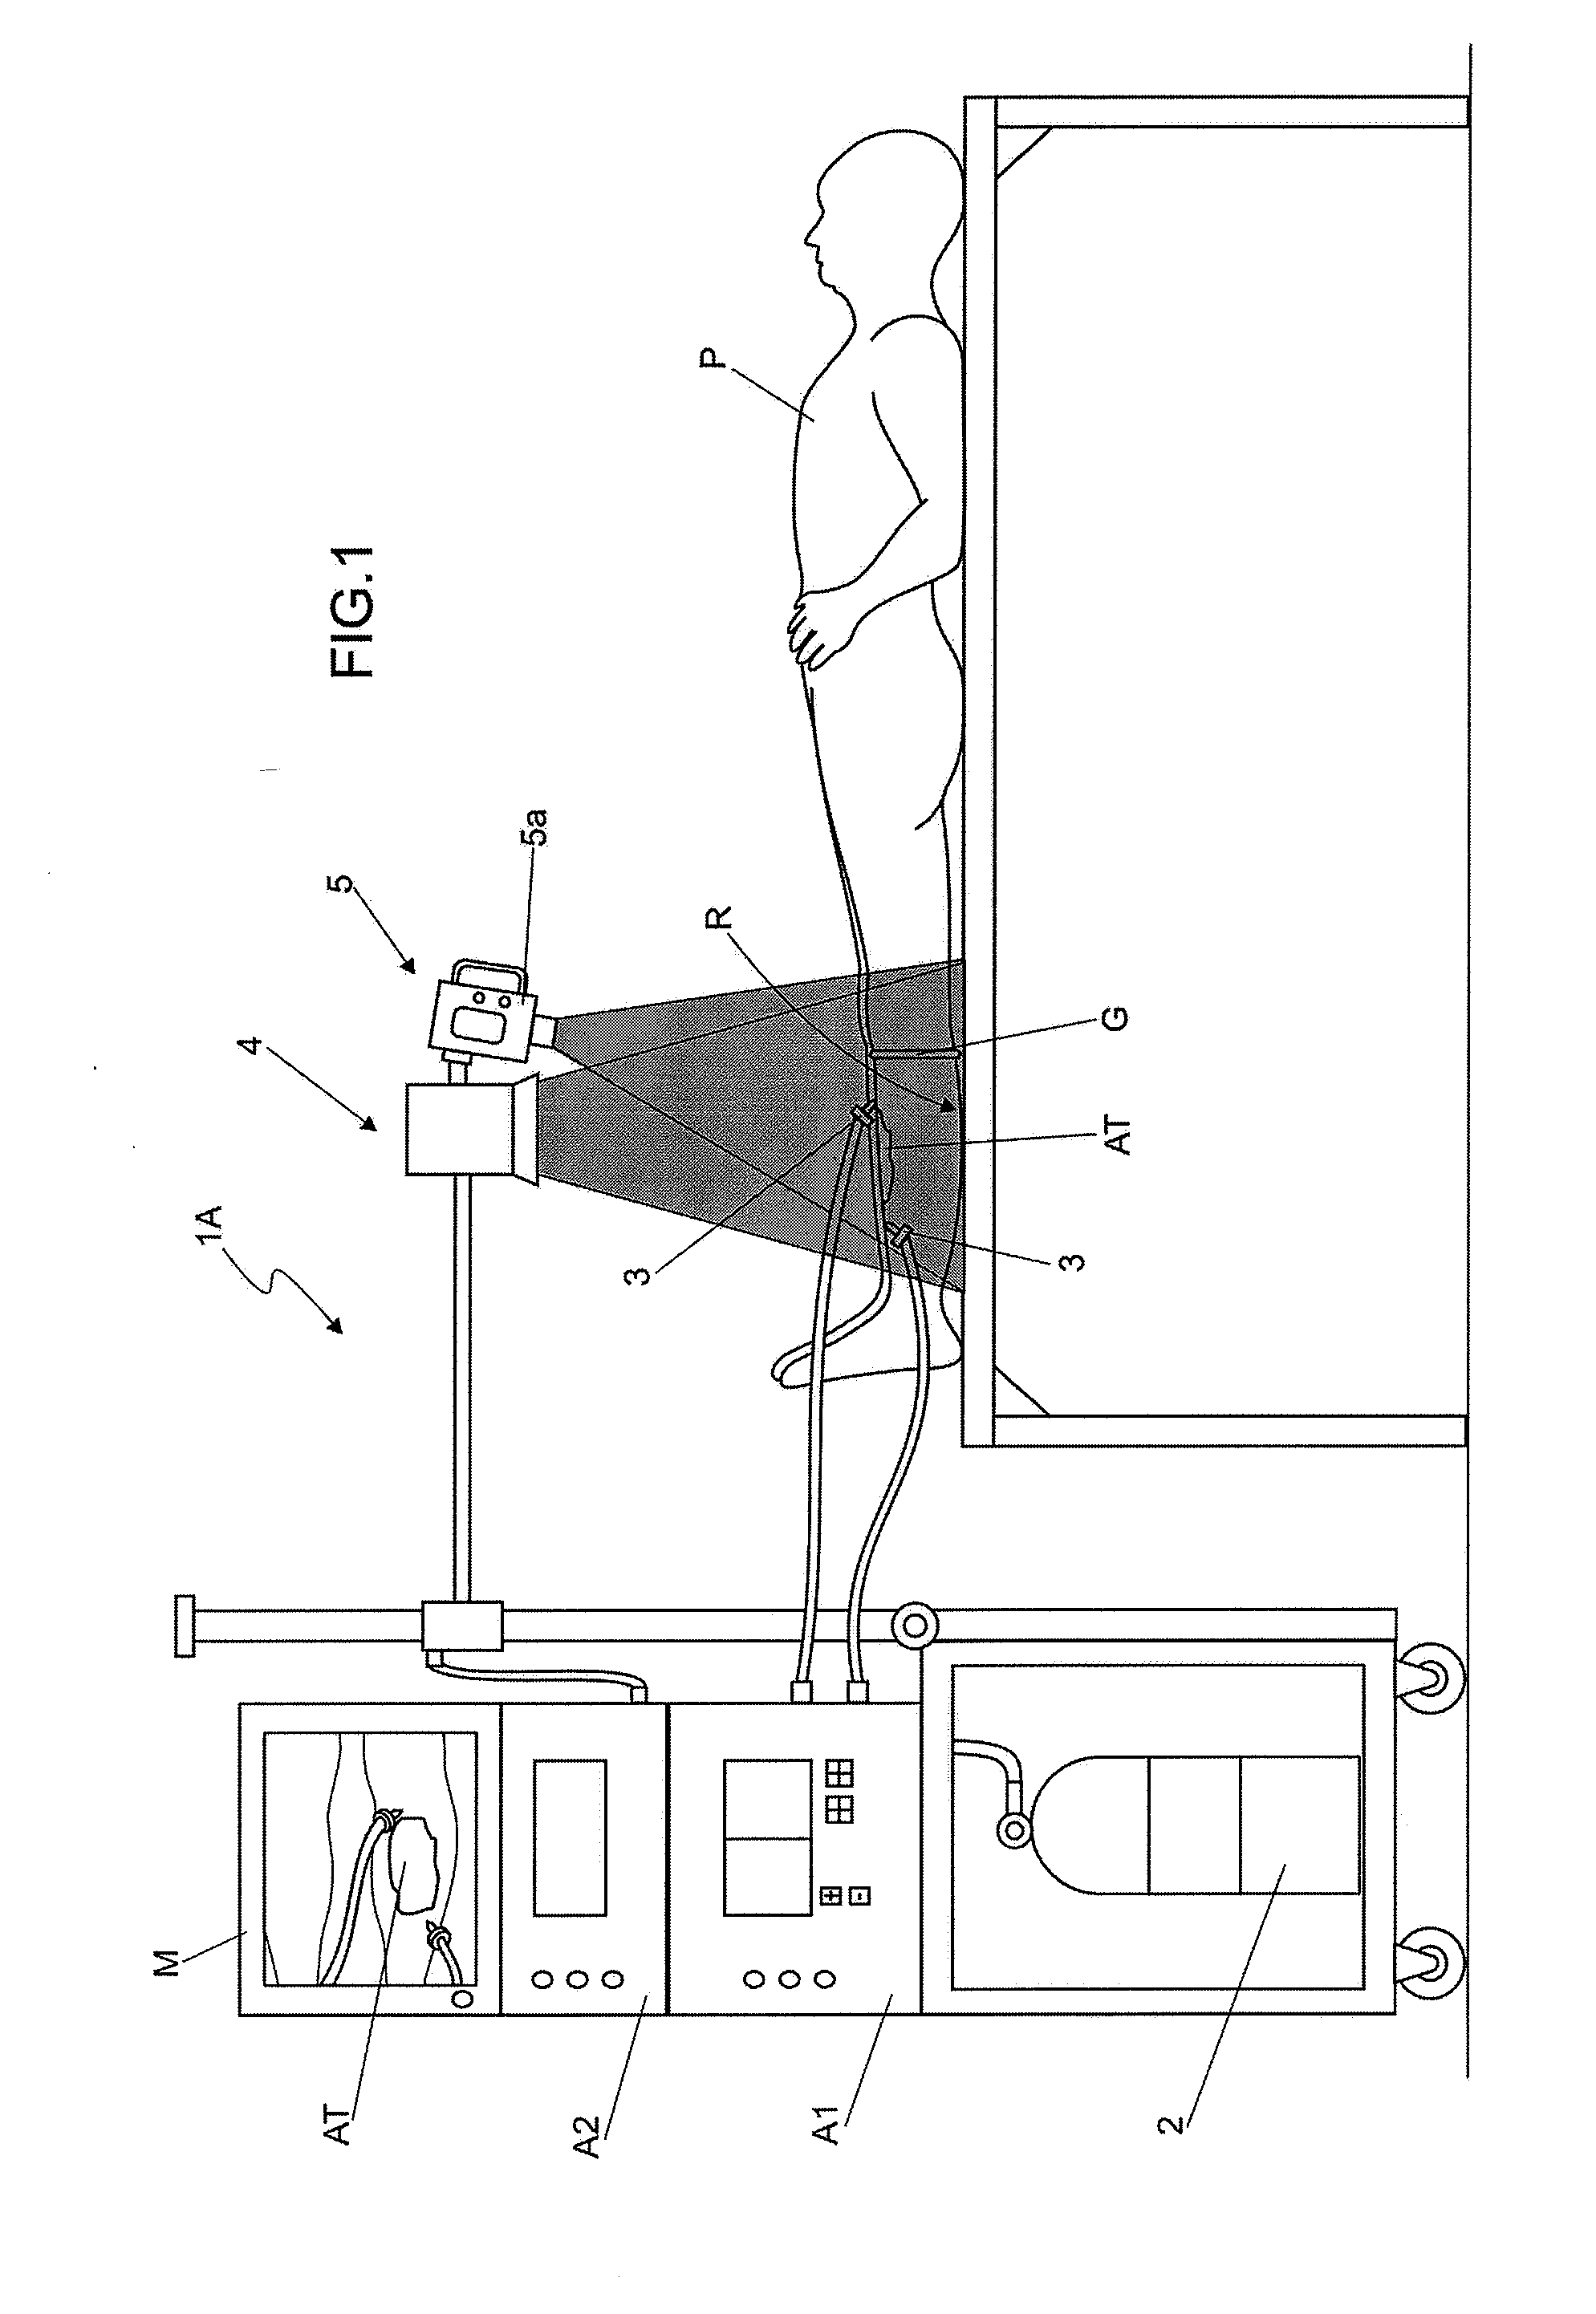 Method and apparatus that associate the parenteral injection of medical grade carbon dioxide (CO2) concomitantly with the application of infrared radiation from thermal and/or light sources using control by means of cutaneous and/or body thermometry